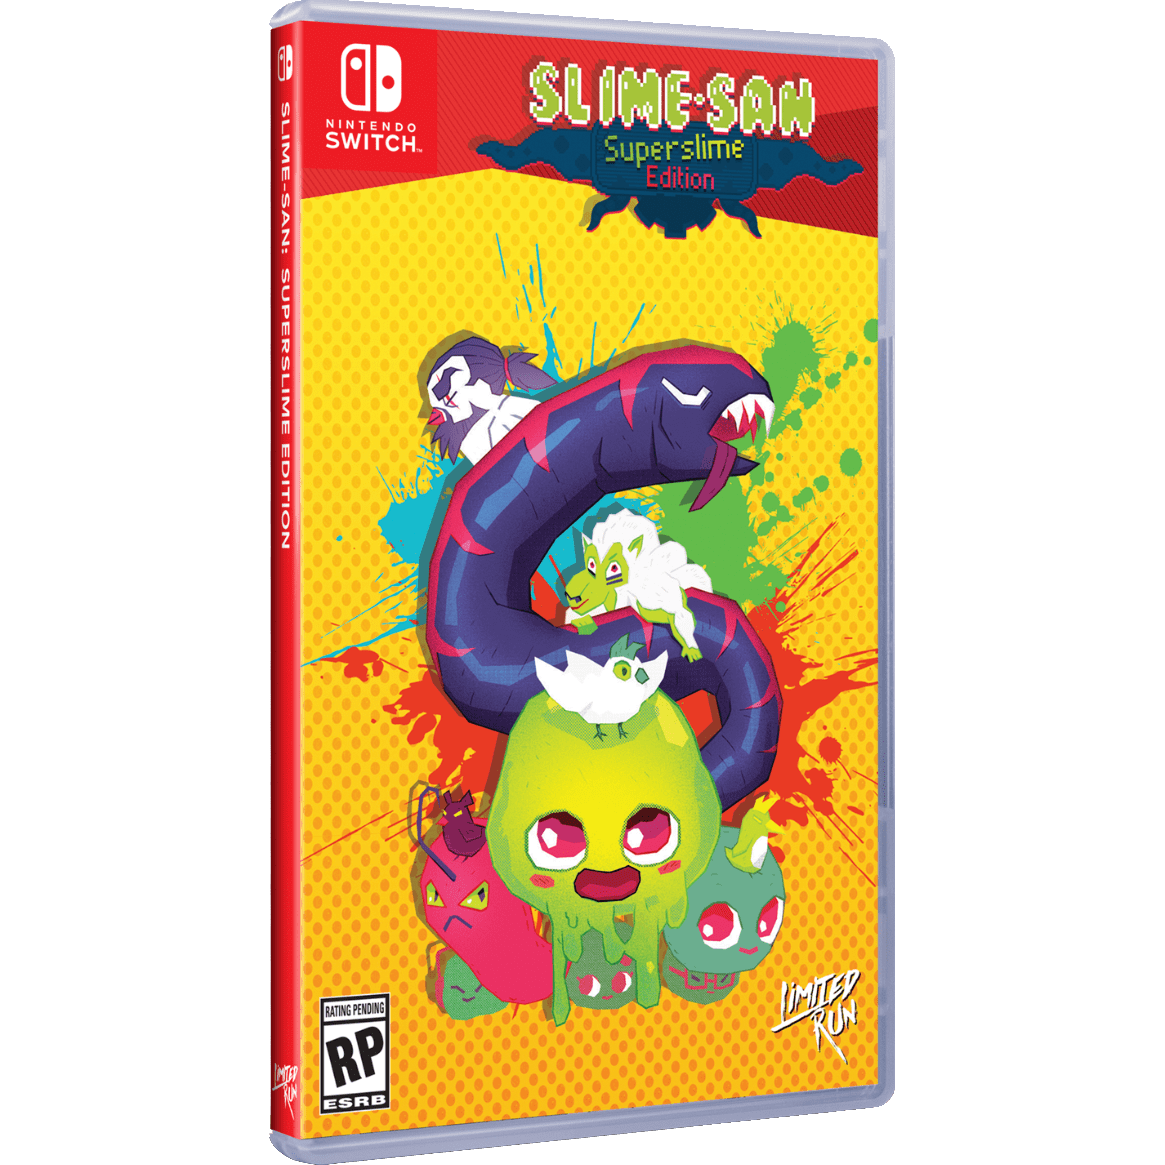 Switch - Slime-San Superslime Edition (Limited Run Game #006) (In Case)